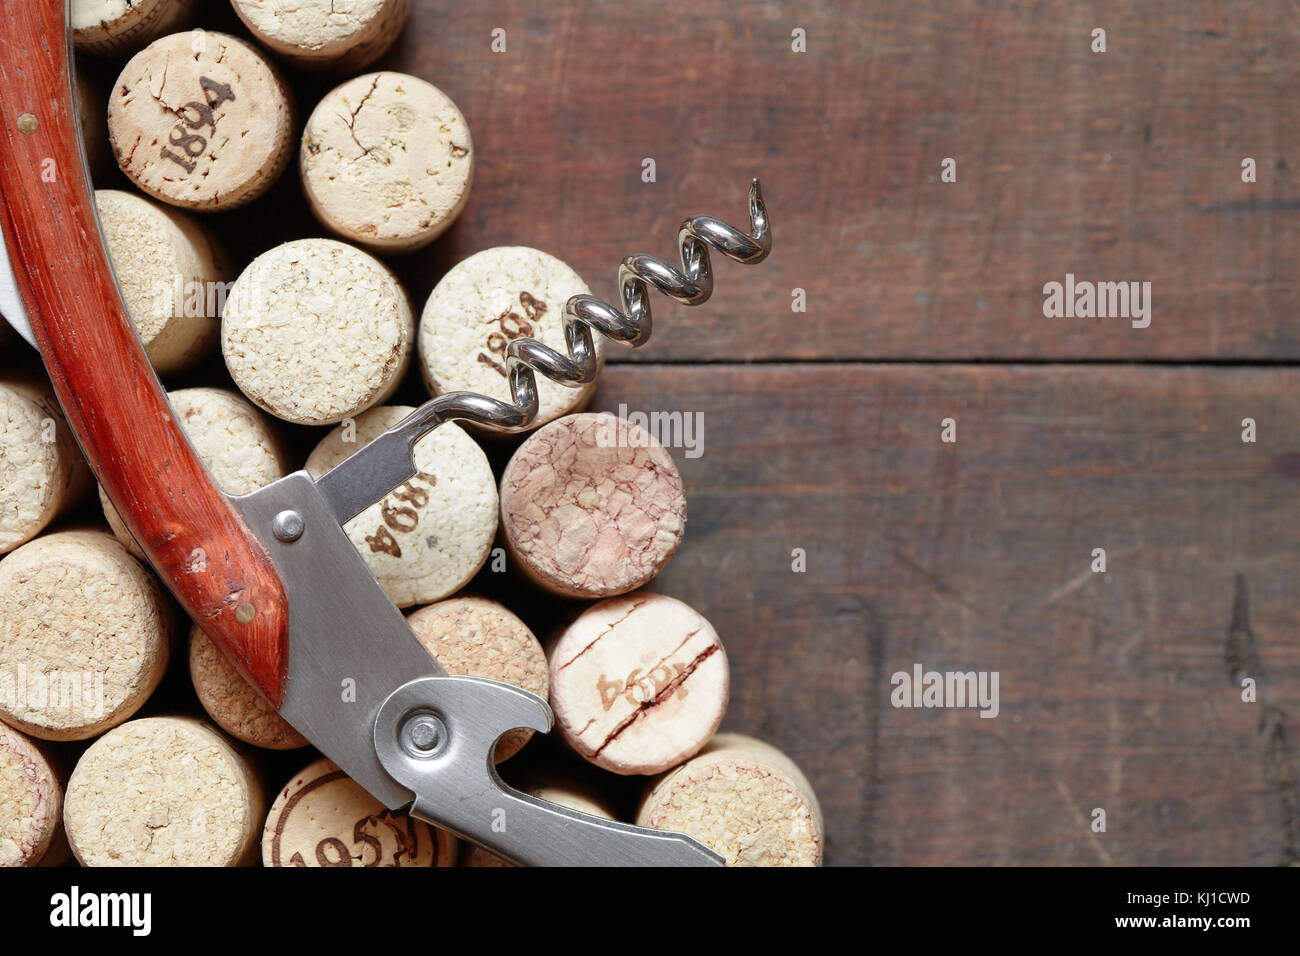 Closeup of corkscrew lying on wine corks on wooden background Stock Photo